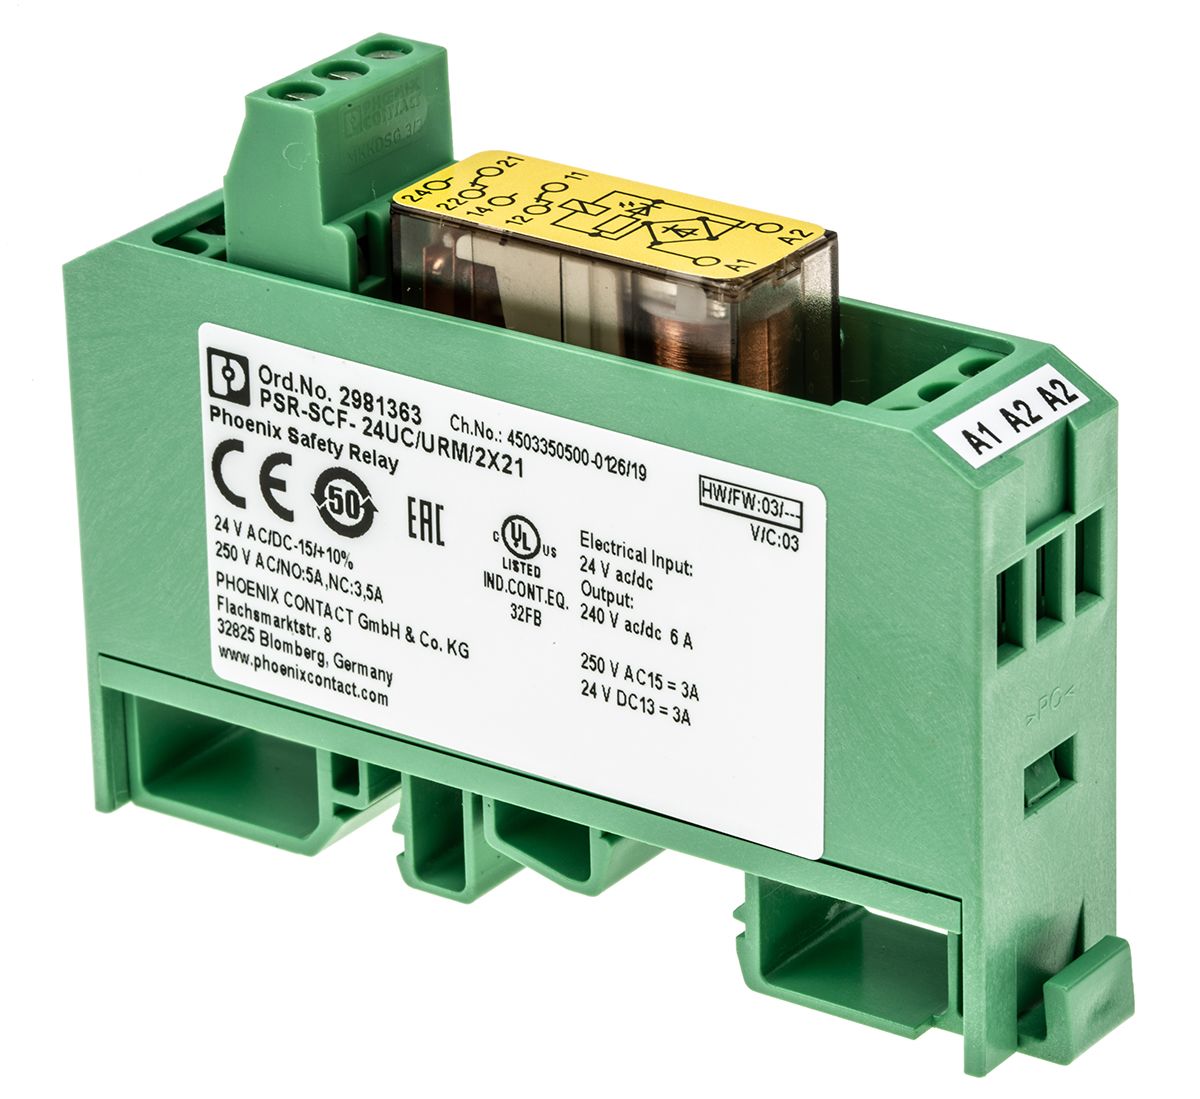 Phoenix Contact DIN Rail Force Guided Relay, 24V dc Coil Voltage, 6A Switching Current, DPDT